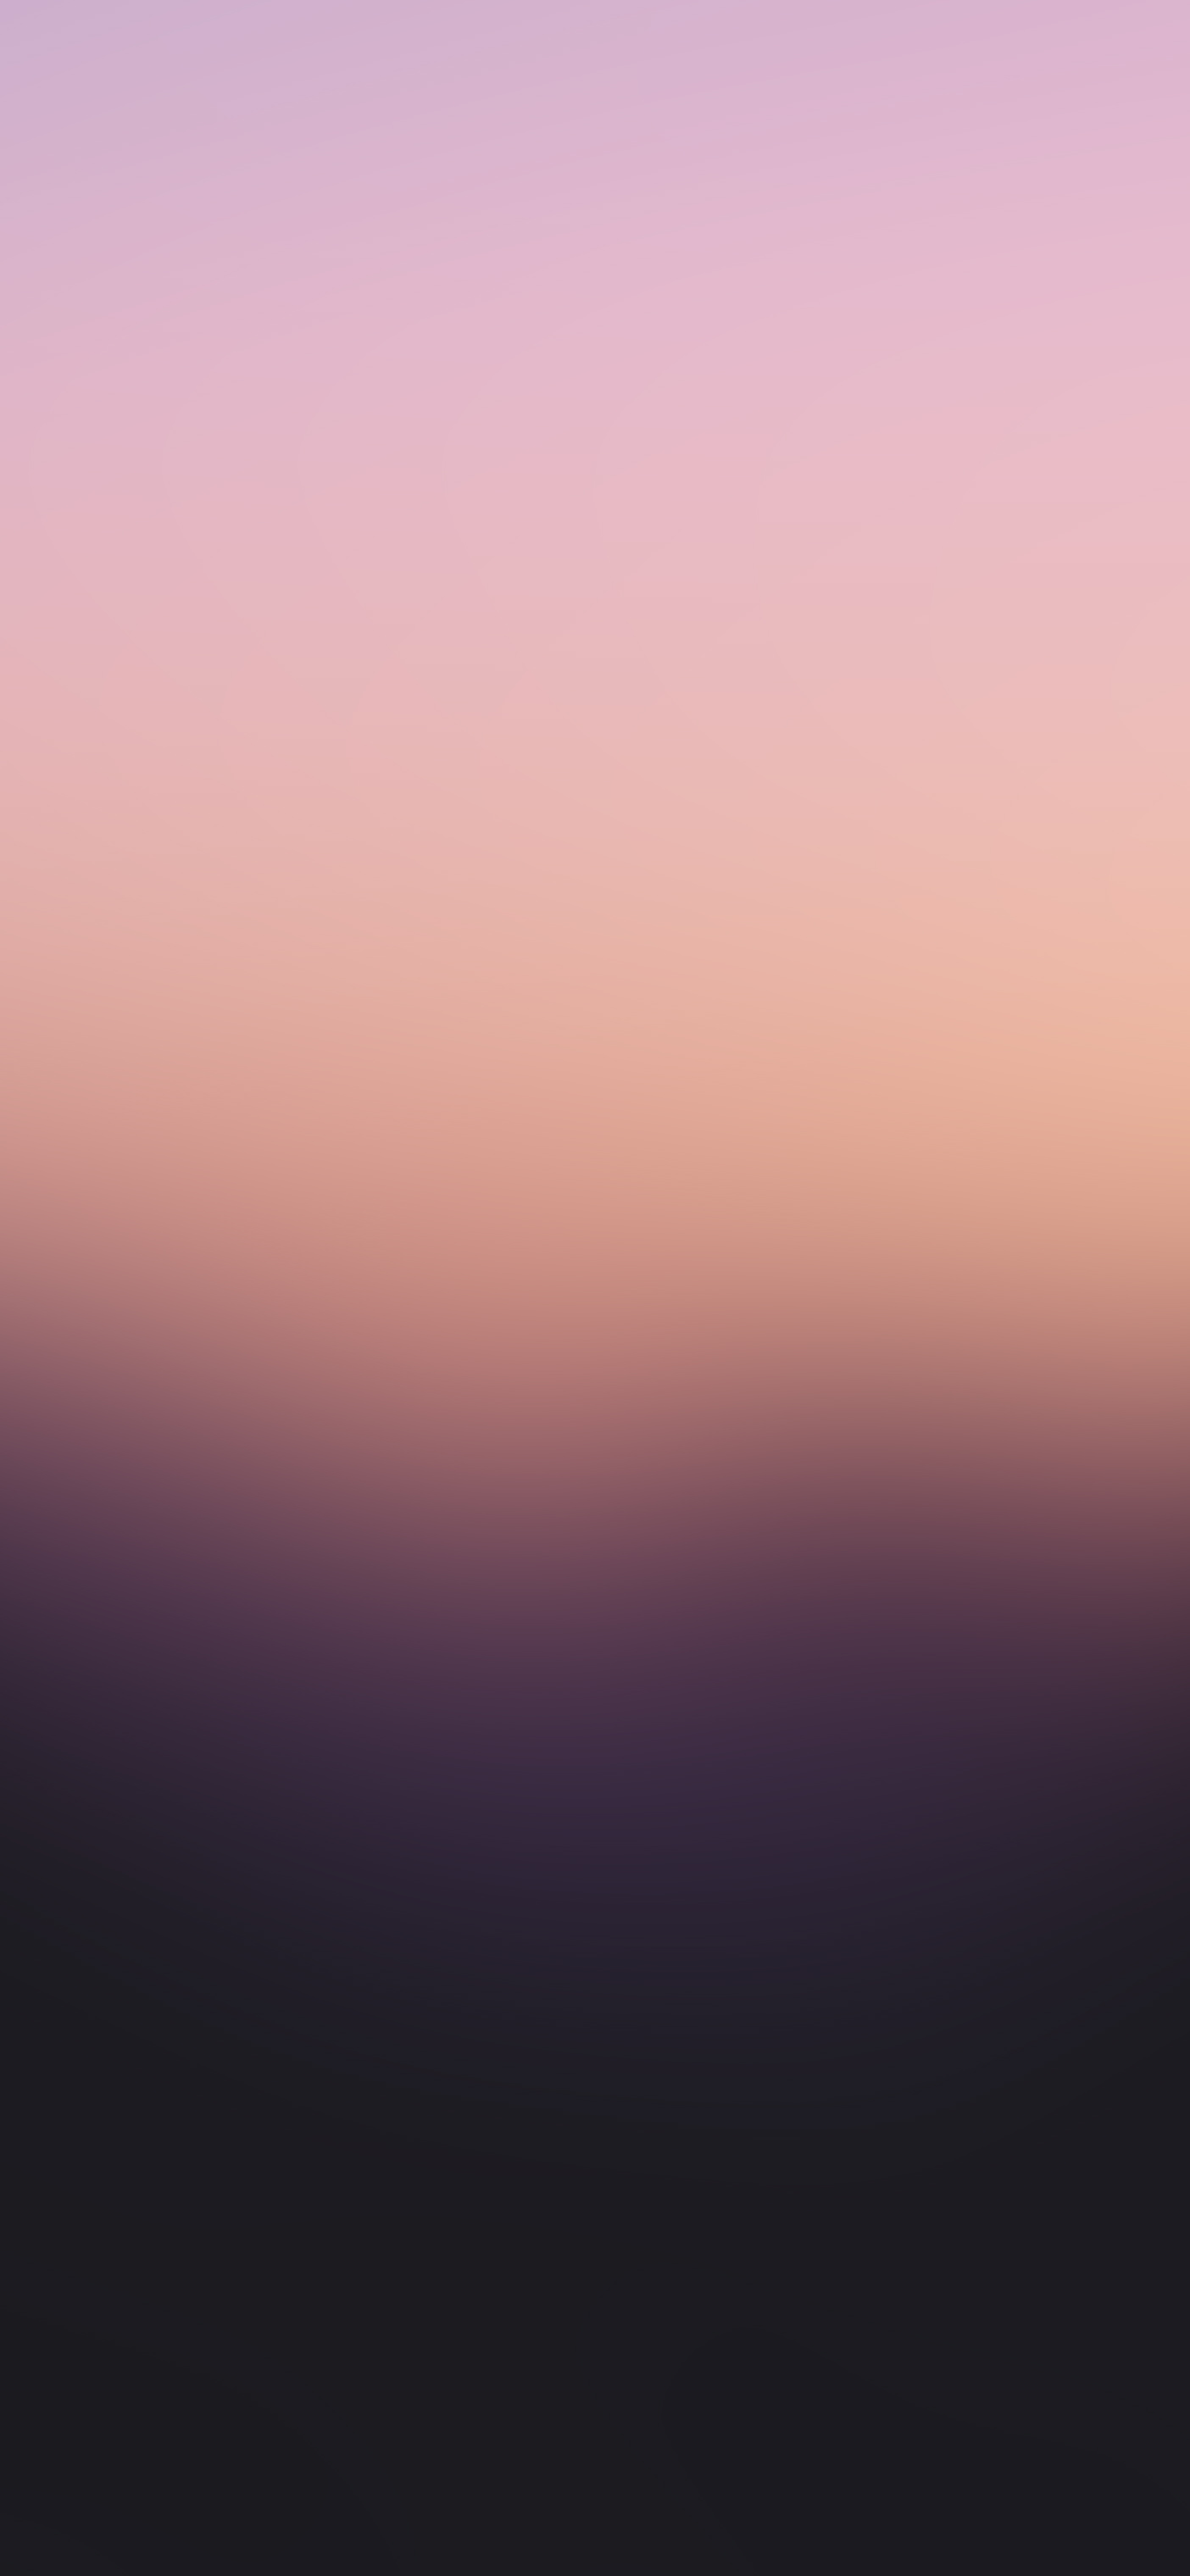 Gradient iPhone Wallpaper for your iPhone 12 Pro Max